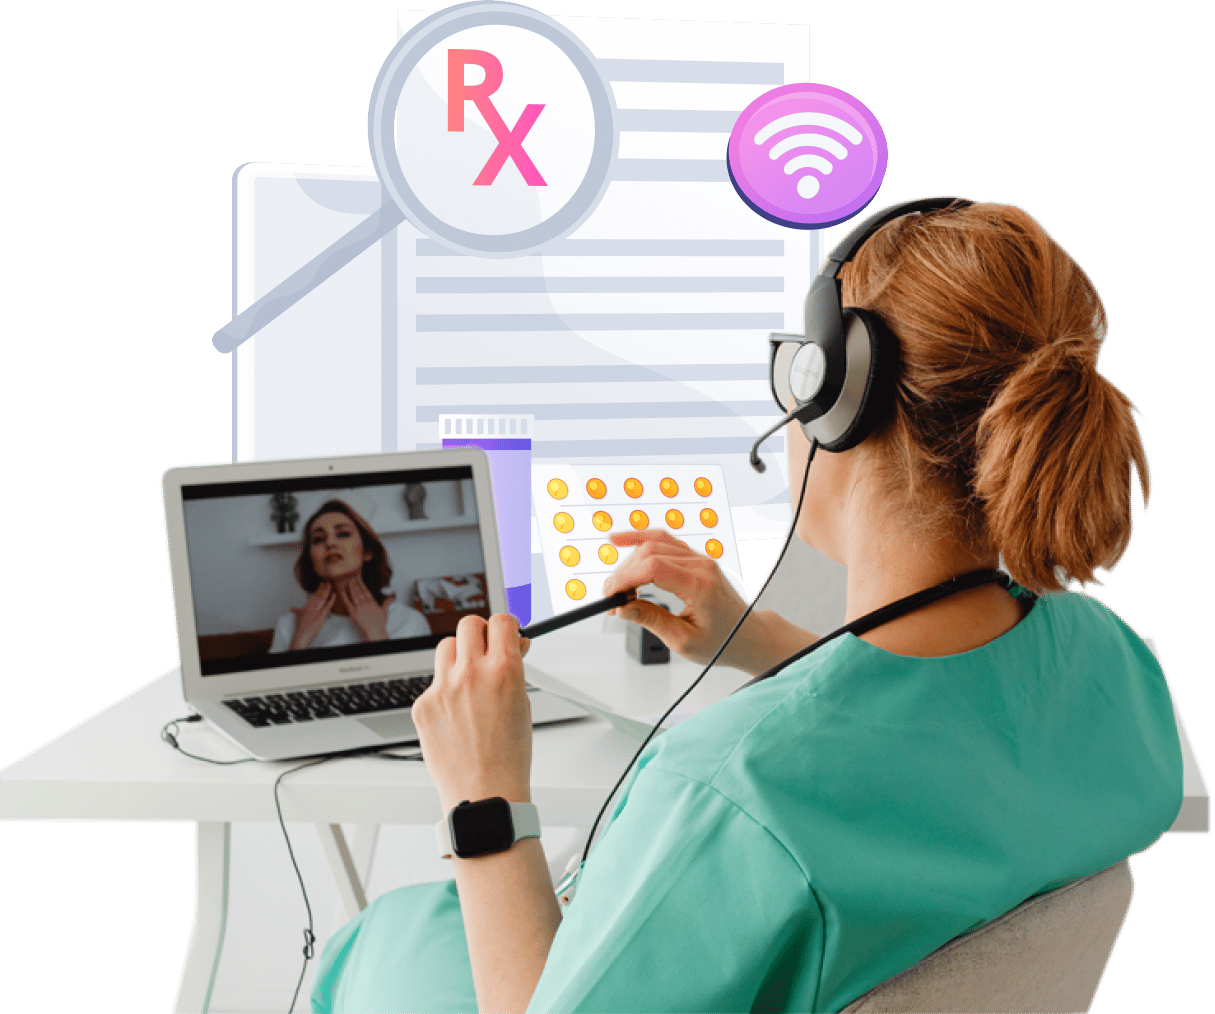 female medical professional sitting in front of laptop engaging in telehealth session with female patient